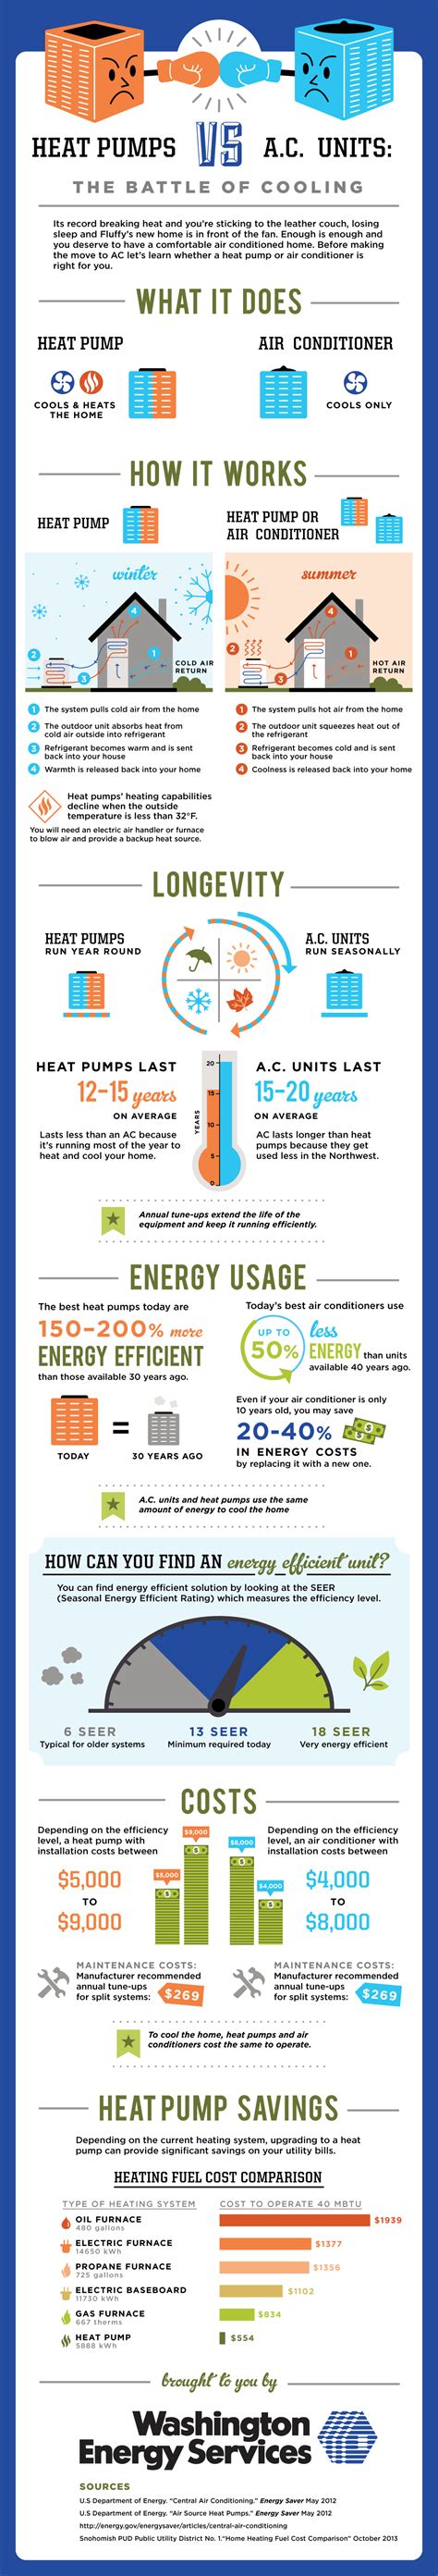 Have lower repair costs than electric heat pumps. Heat pumps vs. AC infographic | Washington Energy Services